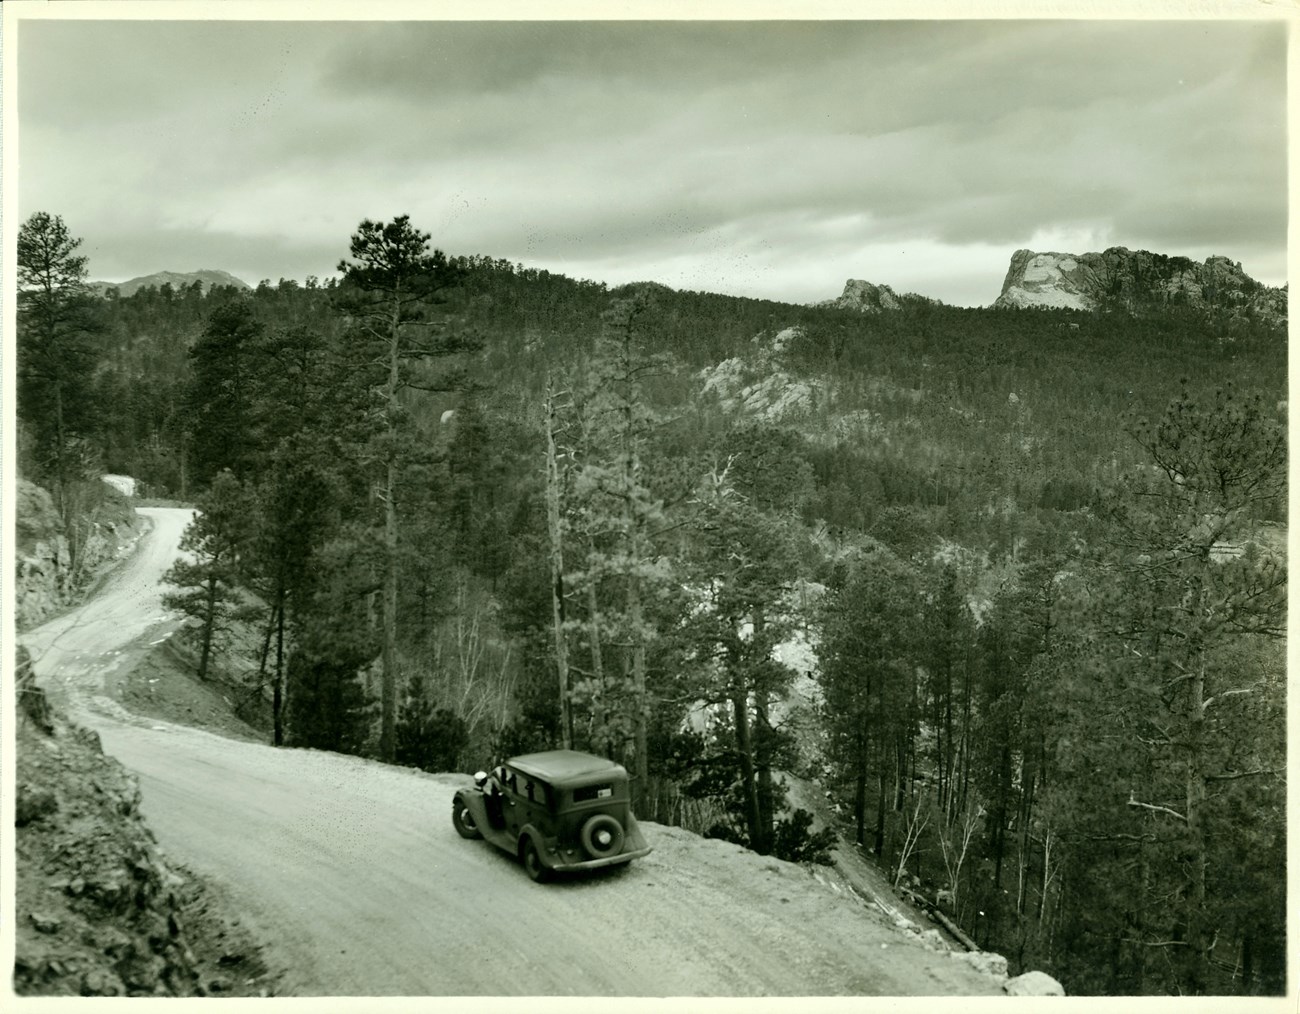 Historic photo of a car on a winding, unpaved road through a tree-covered landscape, with a rock feature rising in the distance.